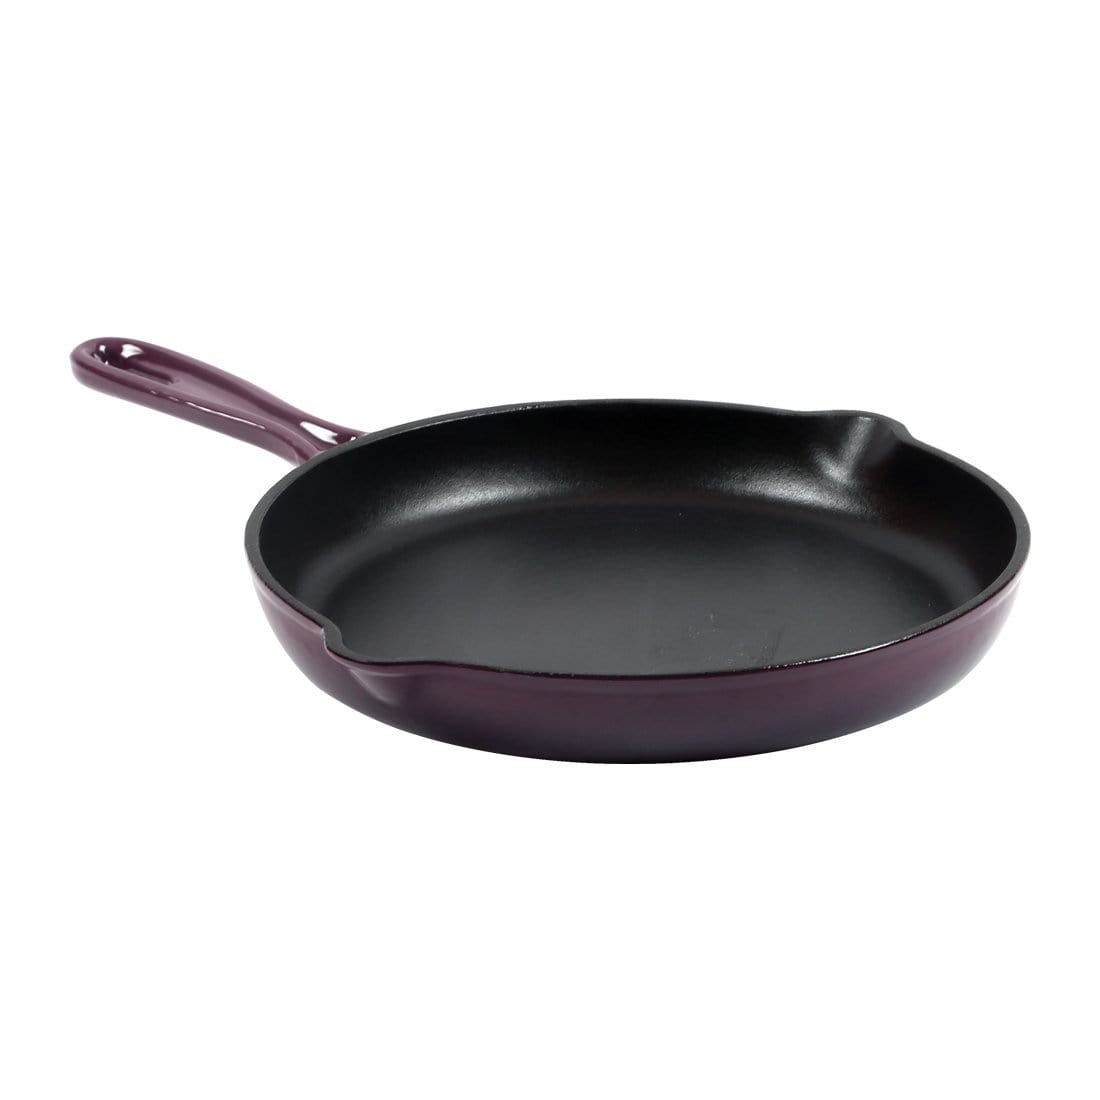 This Cast Iron Flat Top Is Super Versatile — And Beautiful, Too